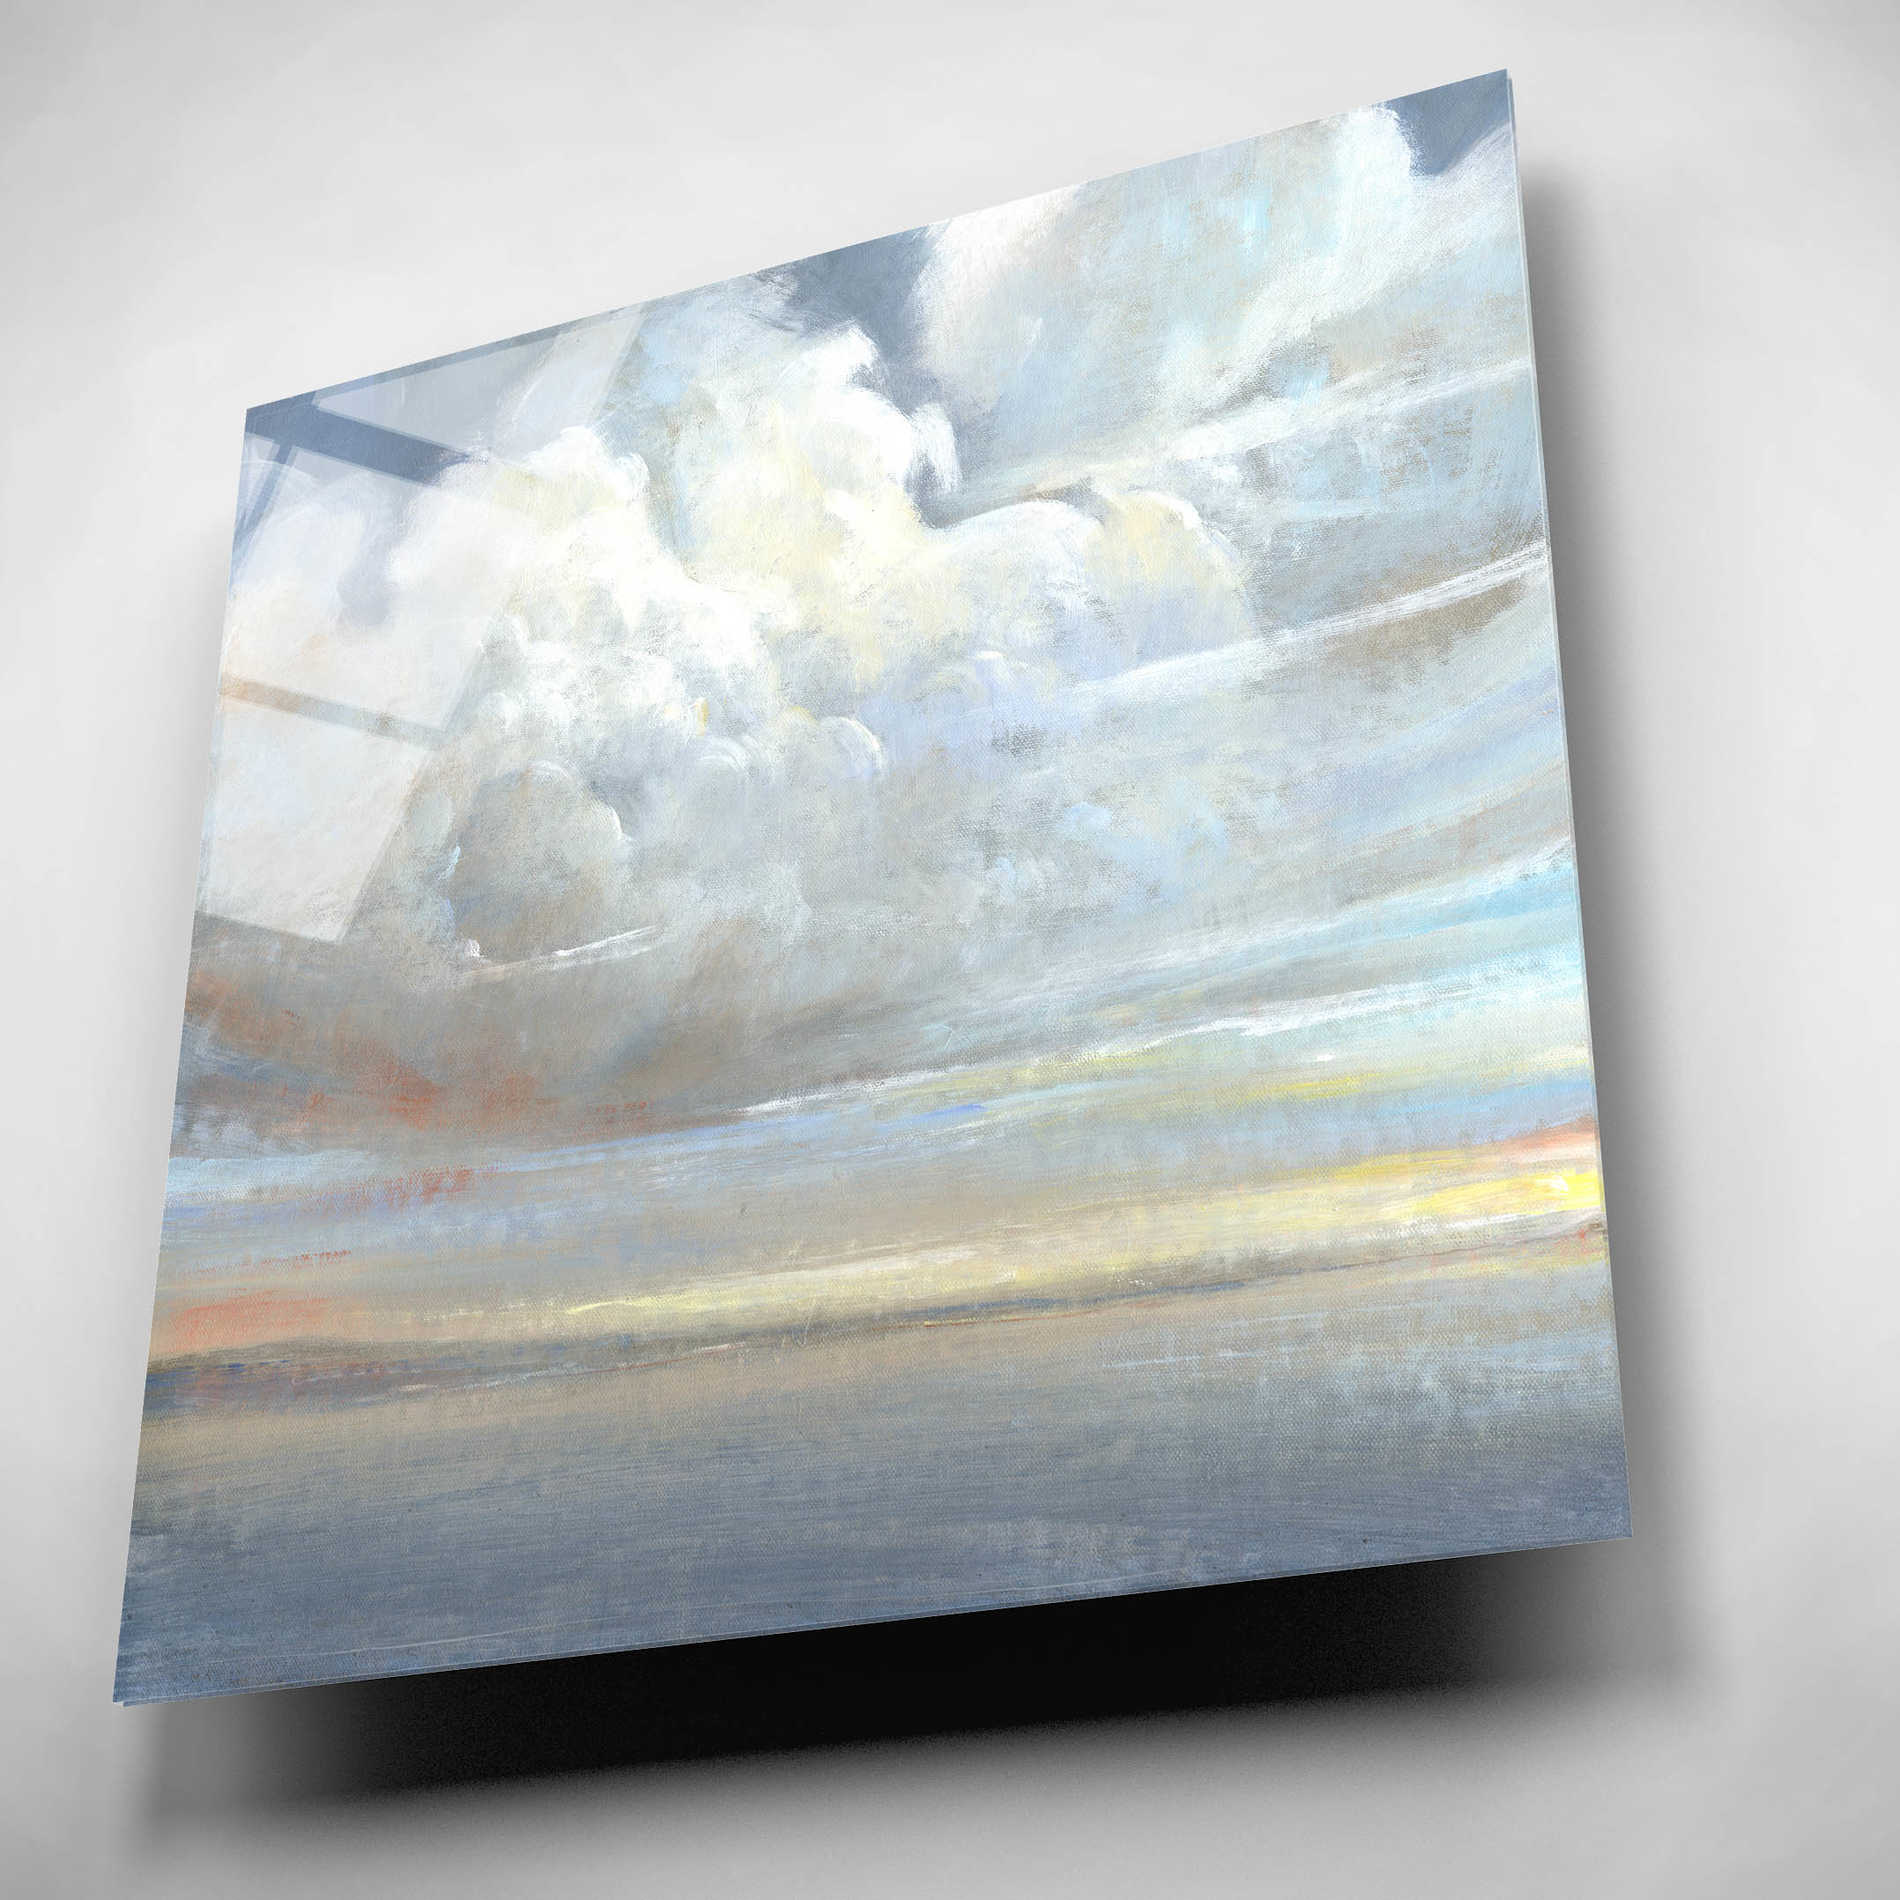 Epic Art 'Passing Storm II' by Tim O'Toole, Acrylic Glass Wall Art,12x12